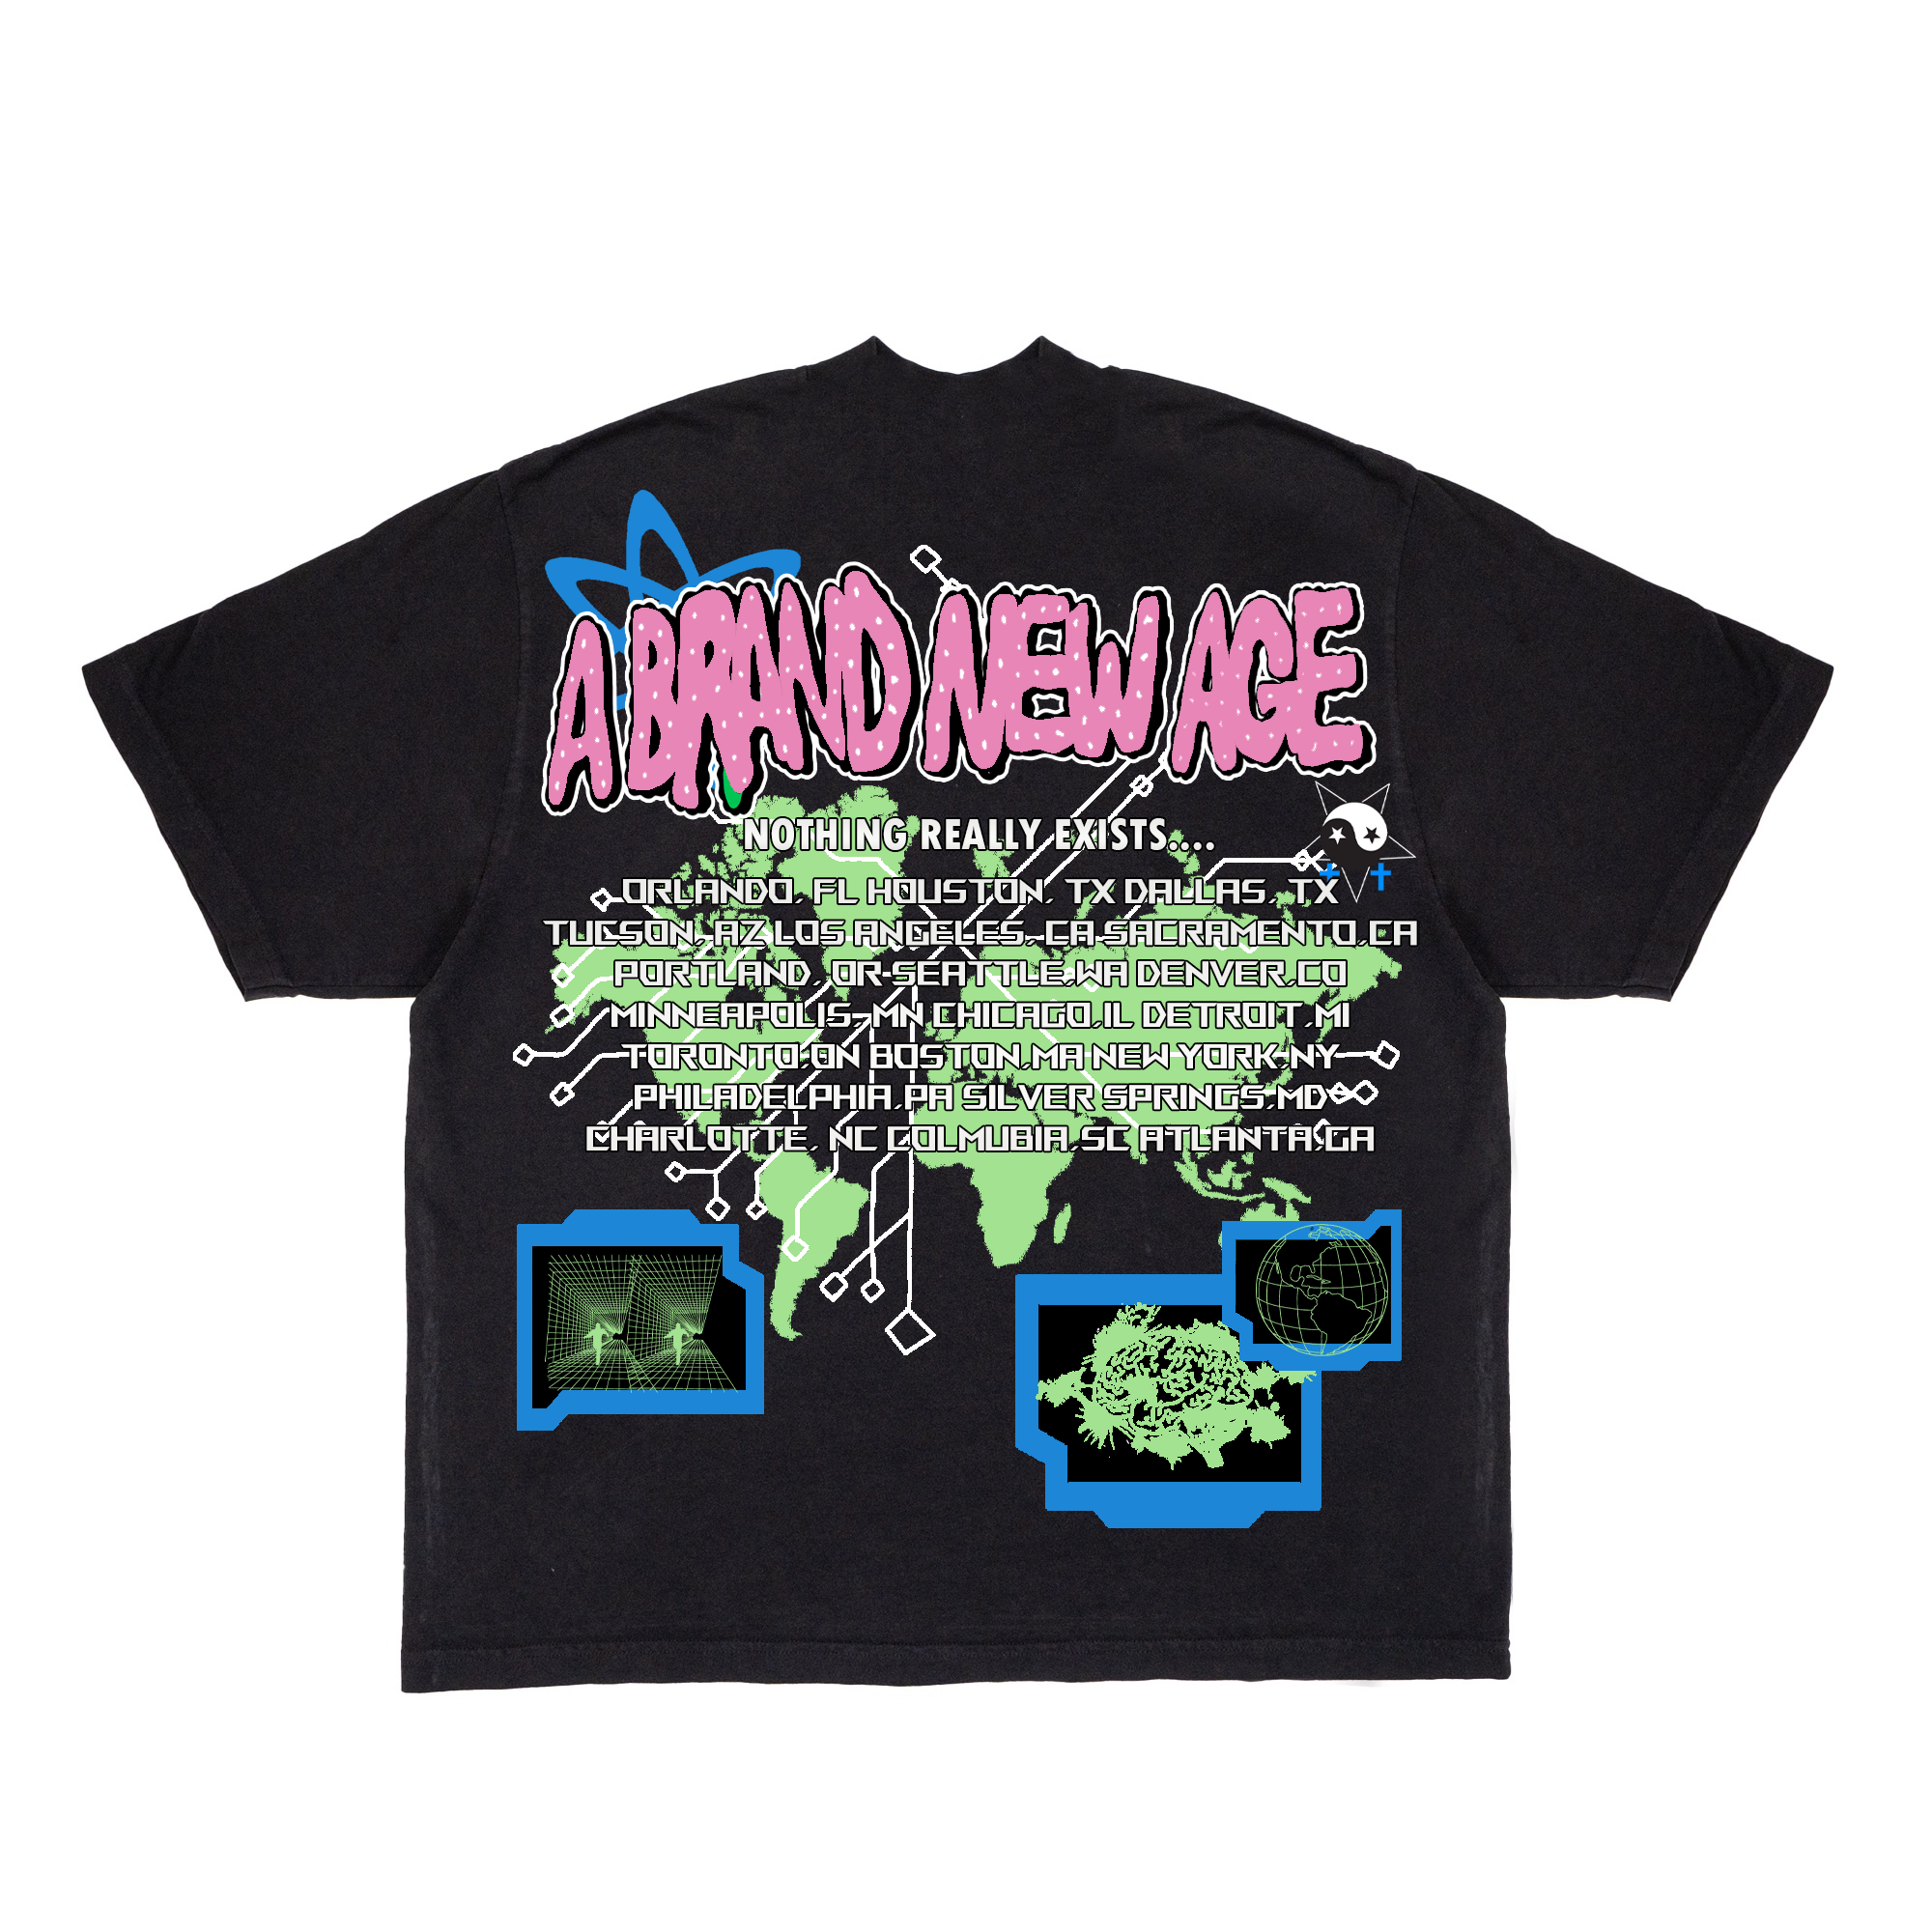 A Brand New Age Tour Tee